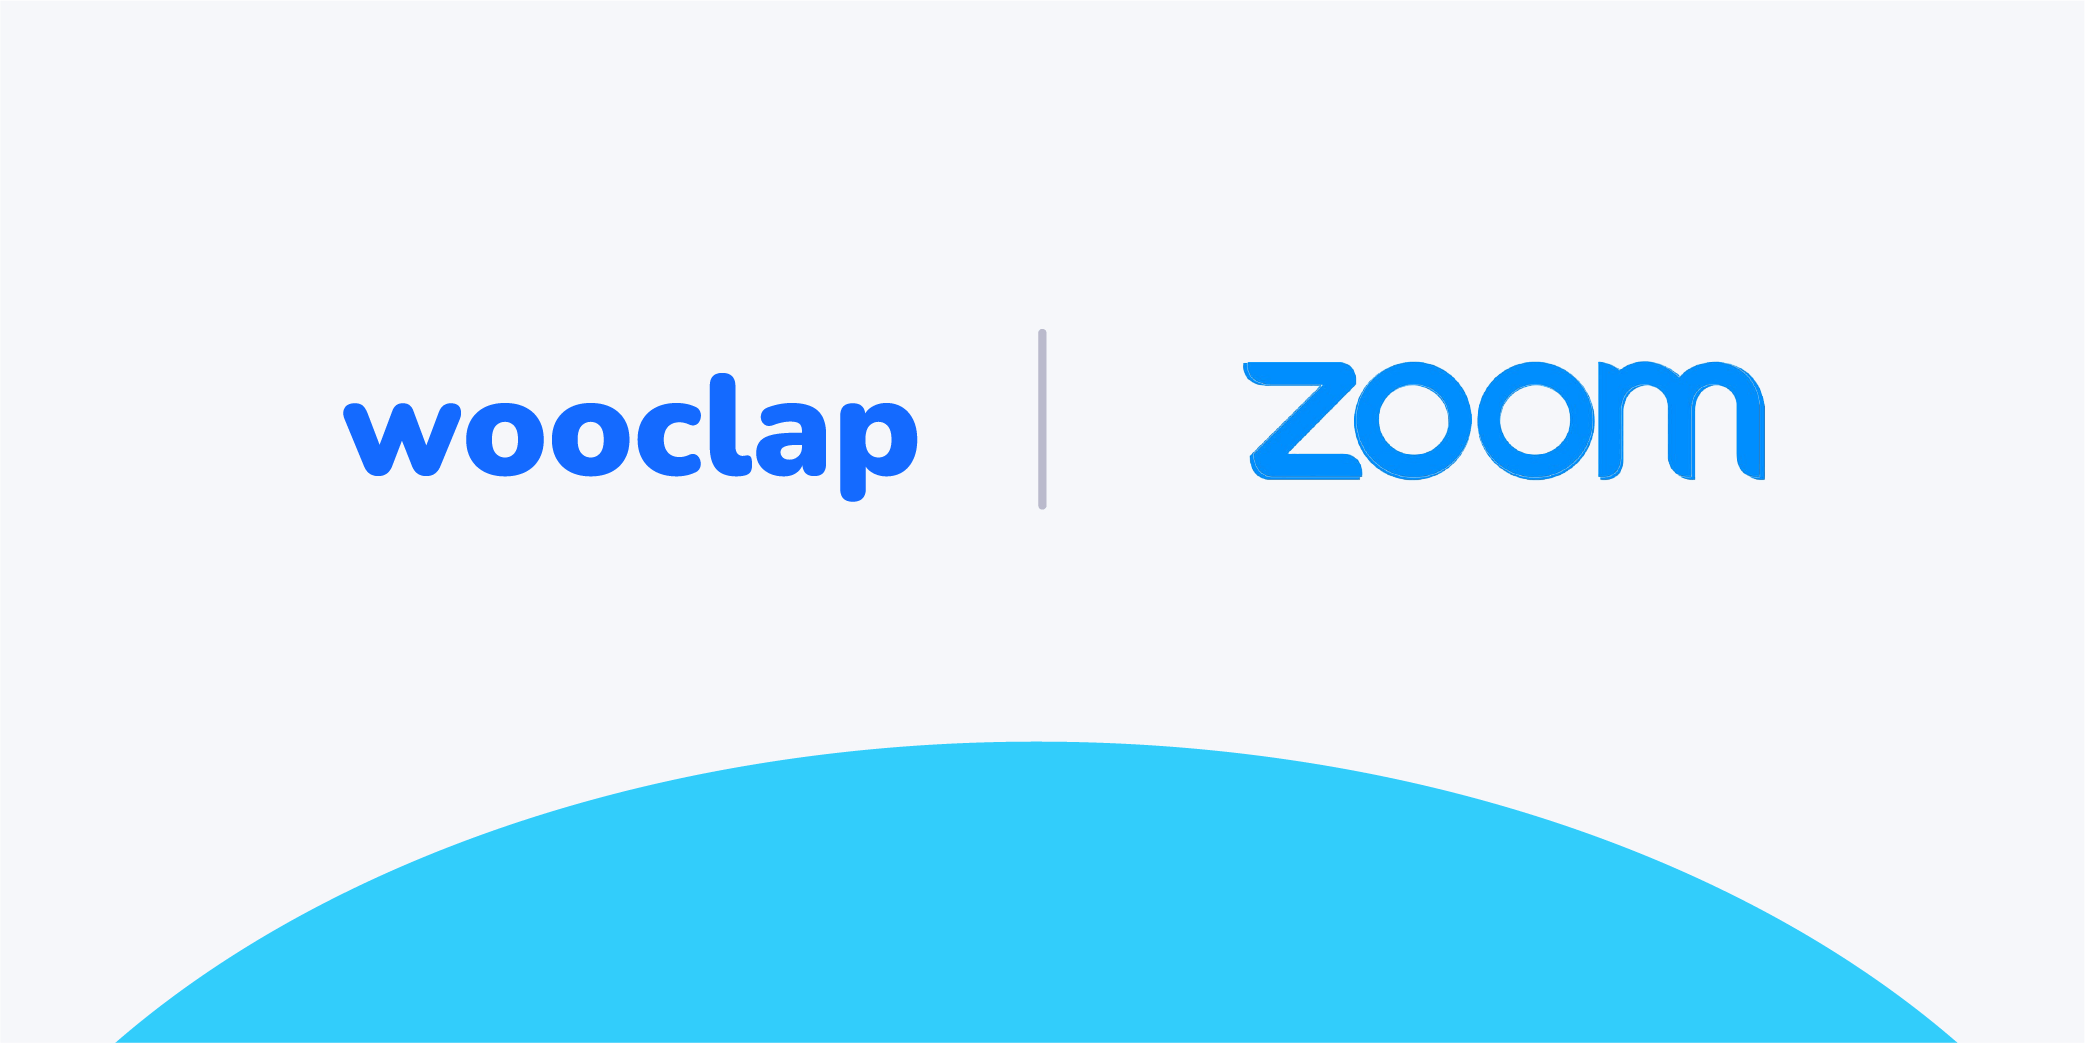 With the Wooclap app for Zoom, offer Wooclap questions directly within the Zoom video conference window.